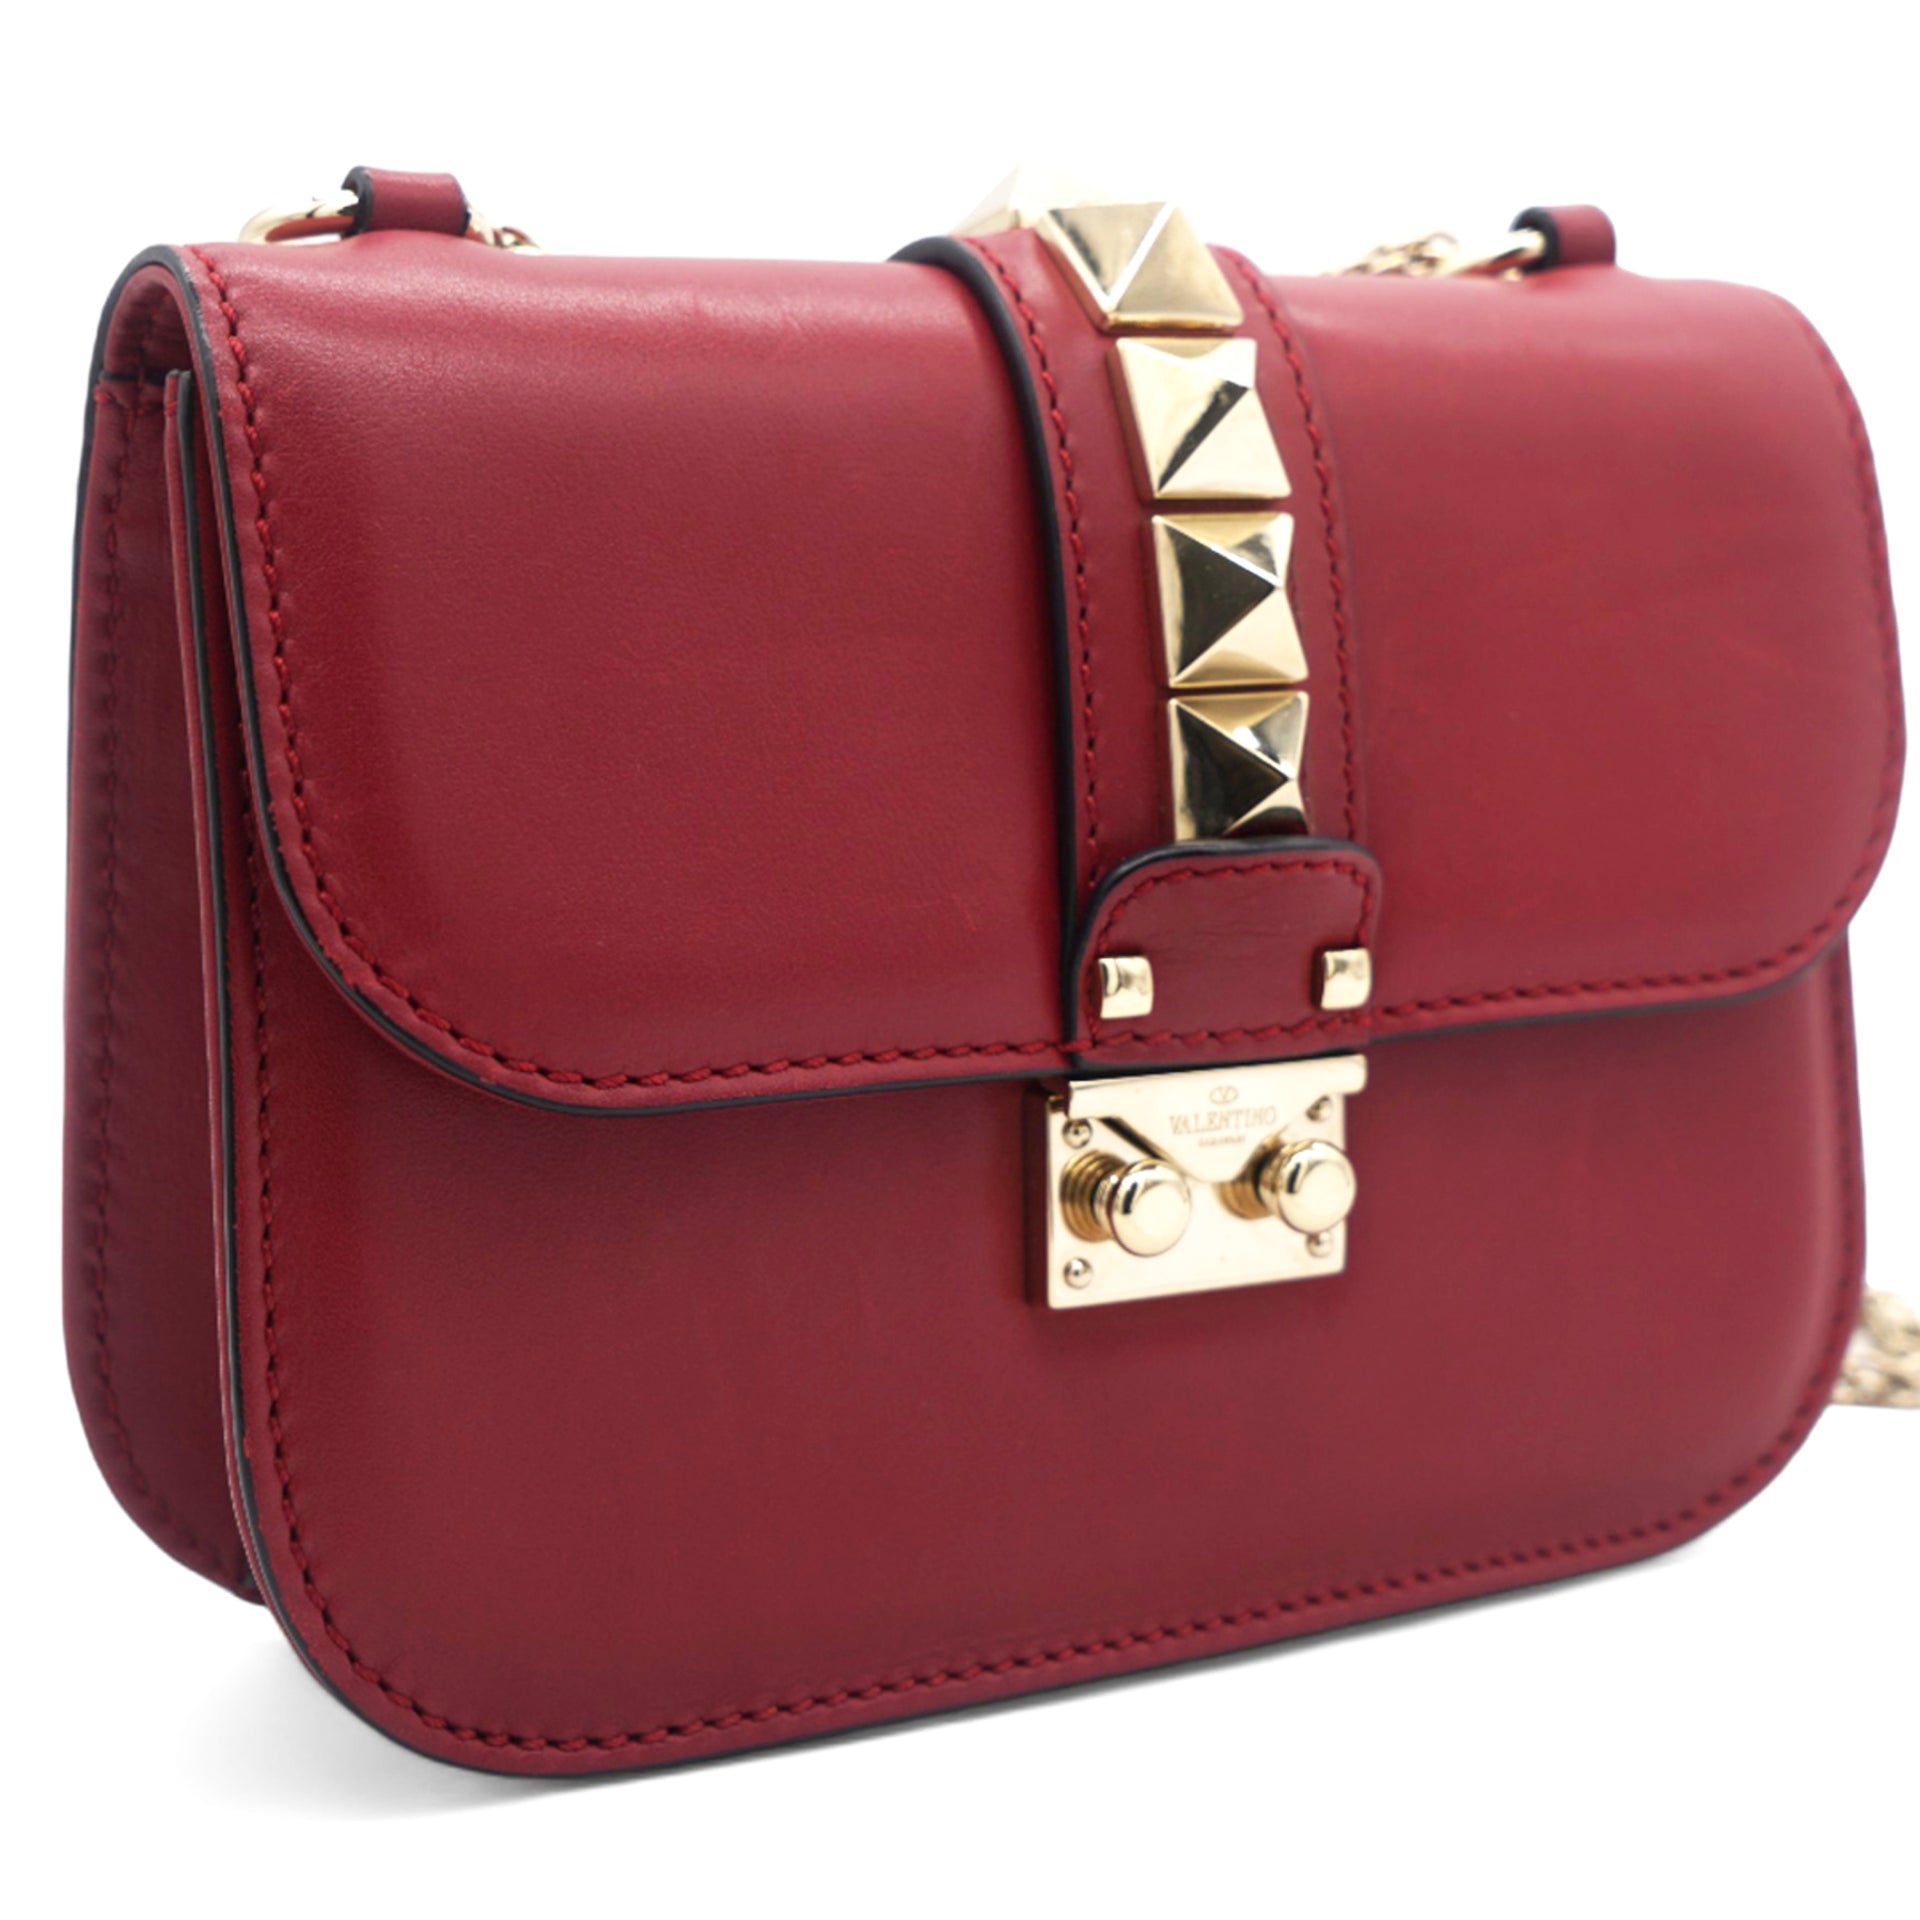 Red Leather Small Rockstud Glam Lock Flap Bag